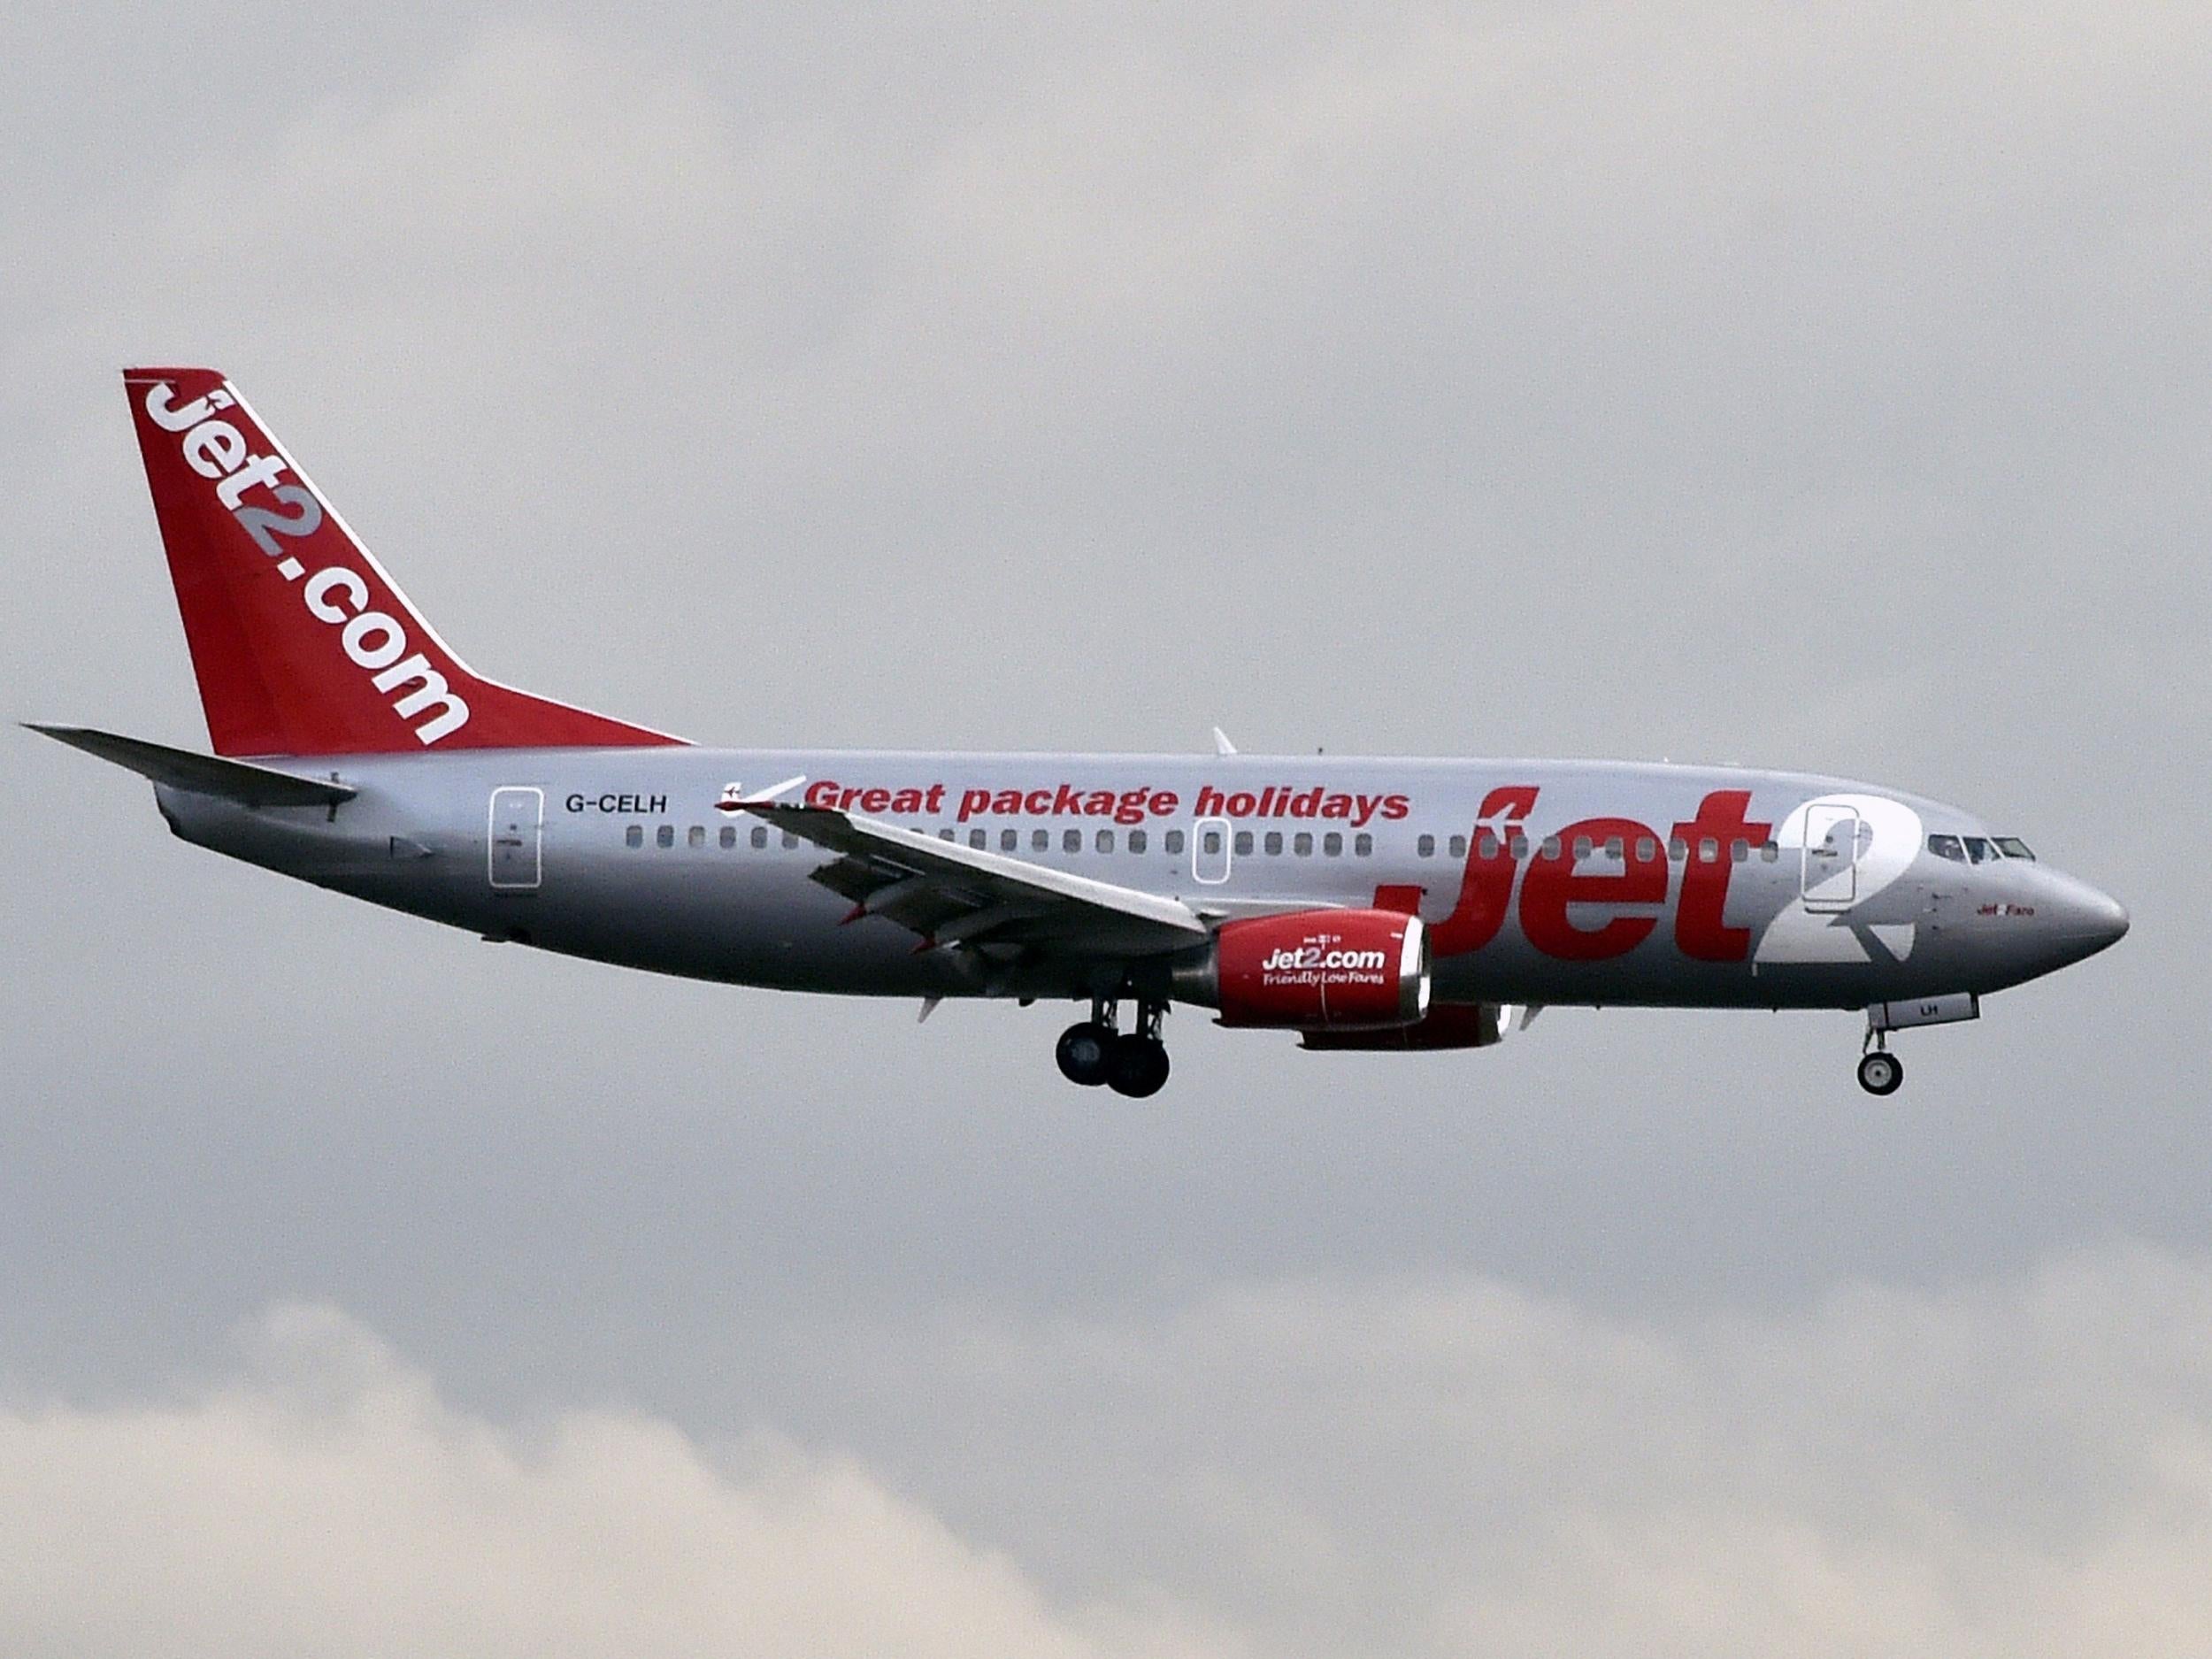 Jet2 was the only UK airport to receive five stars for punctuality